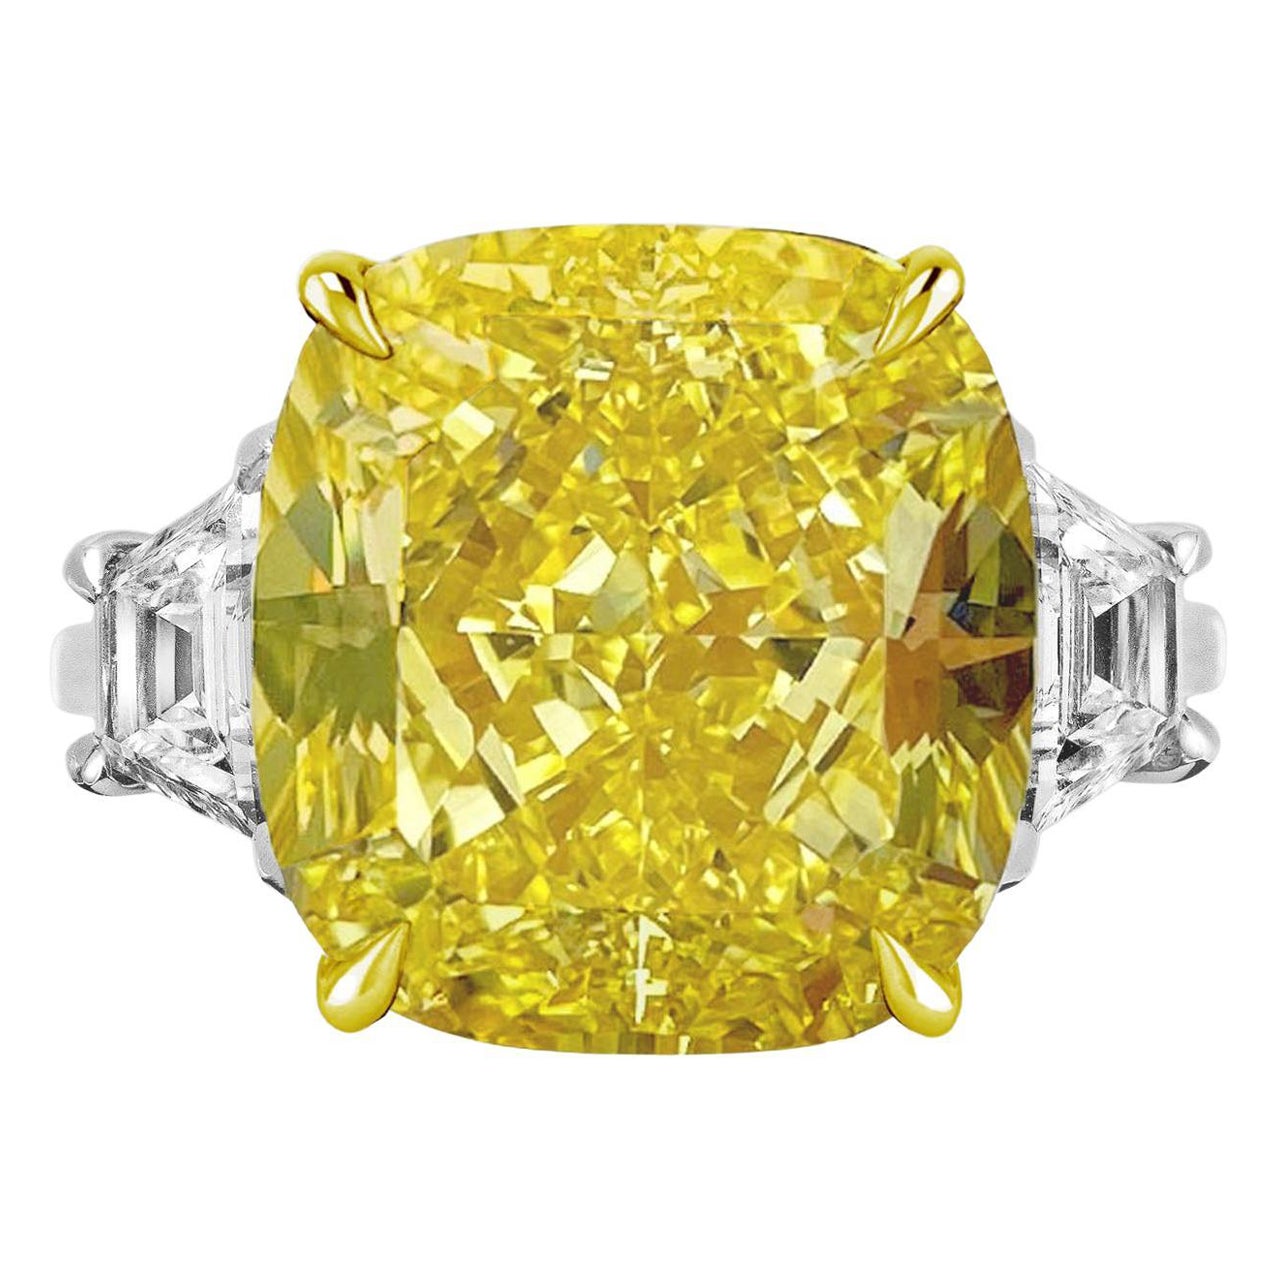 Made in Italy GIA Certified 6 Carat Fancy Yellow Diamond Ring VVS2 Clarity For Sale